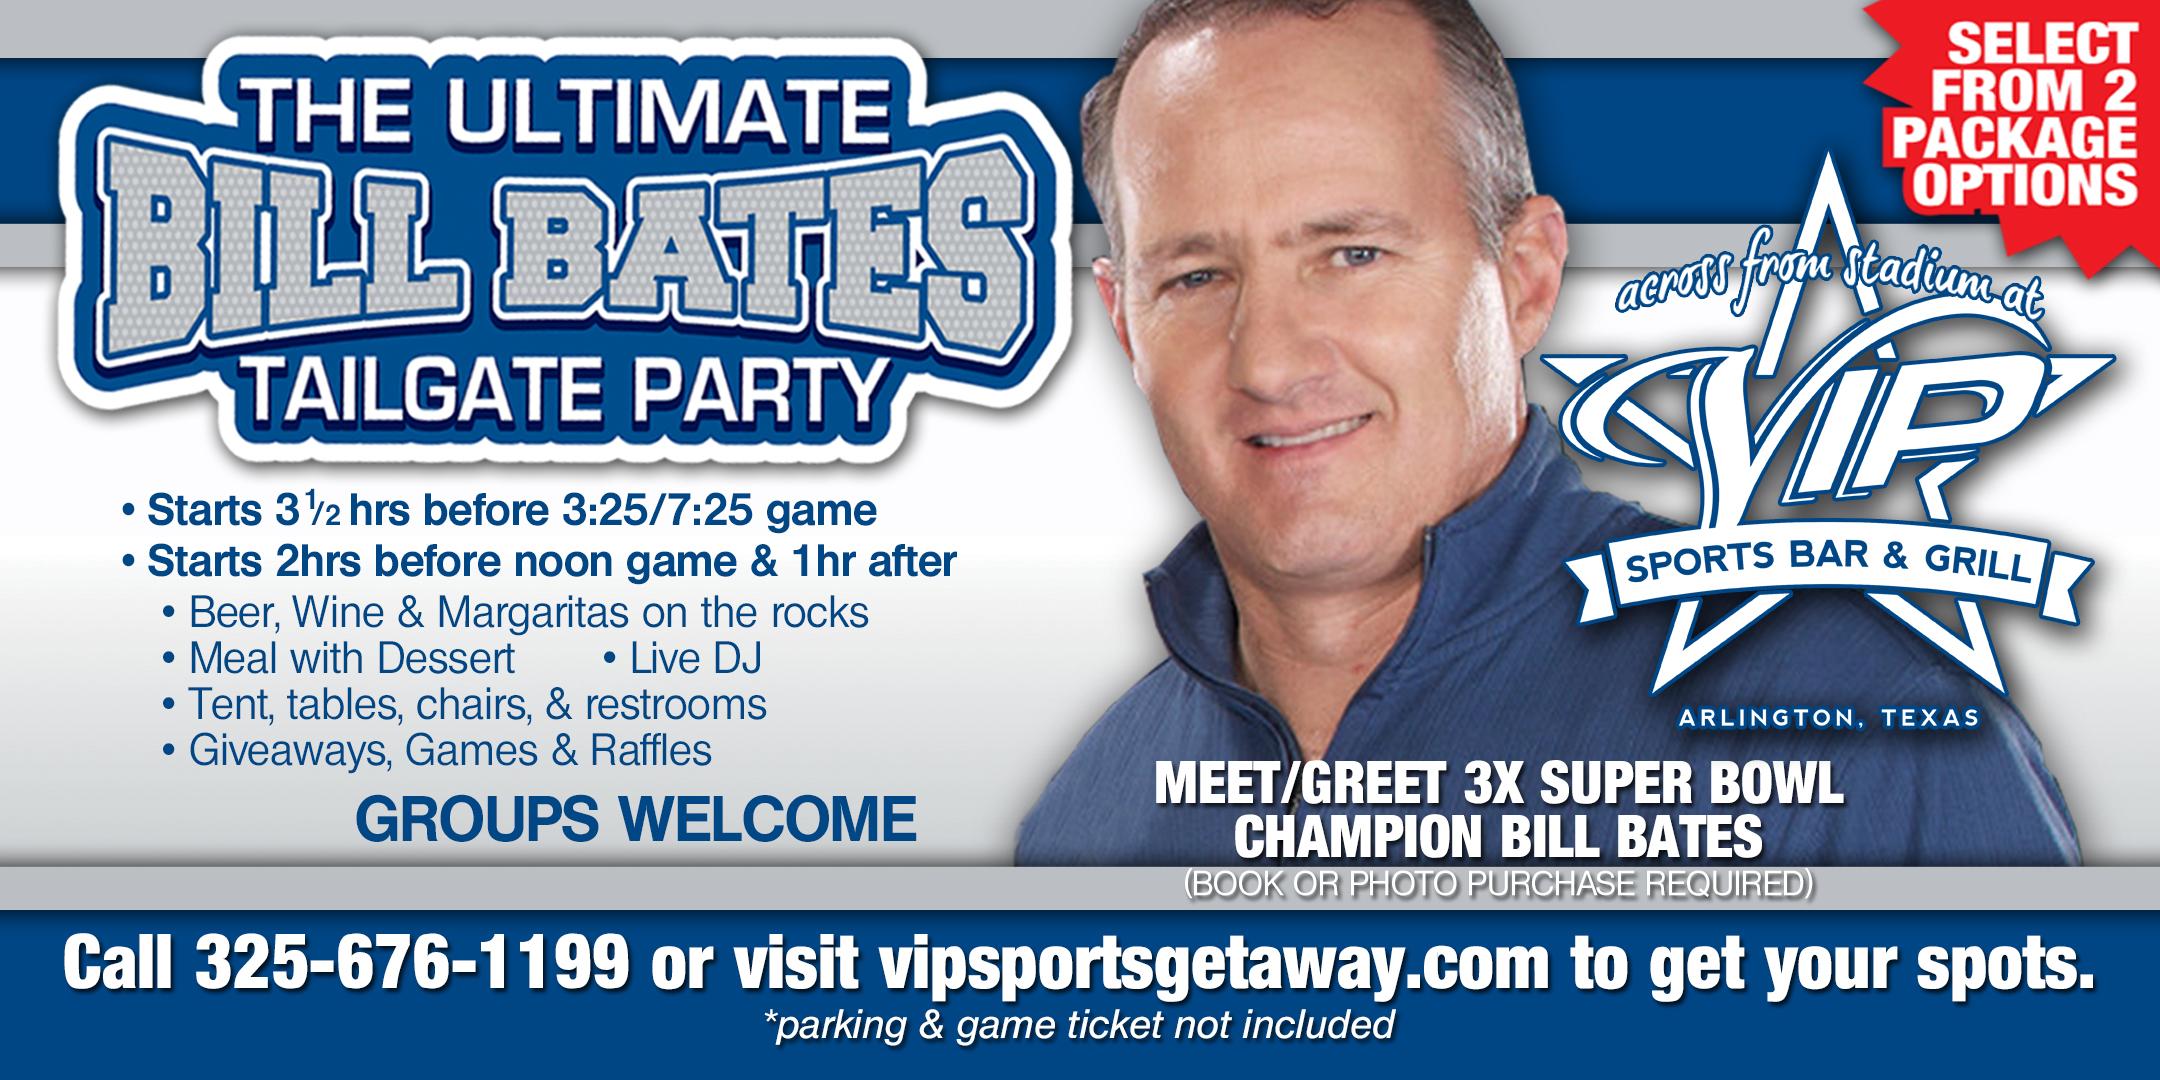 Fun Town RV Presents the Ultimate Bill Bates Tailgate PartyCowboys v